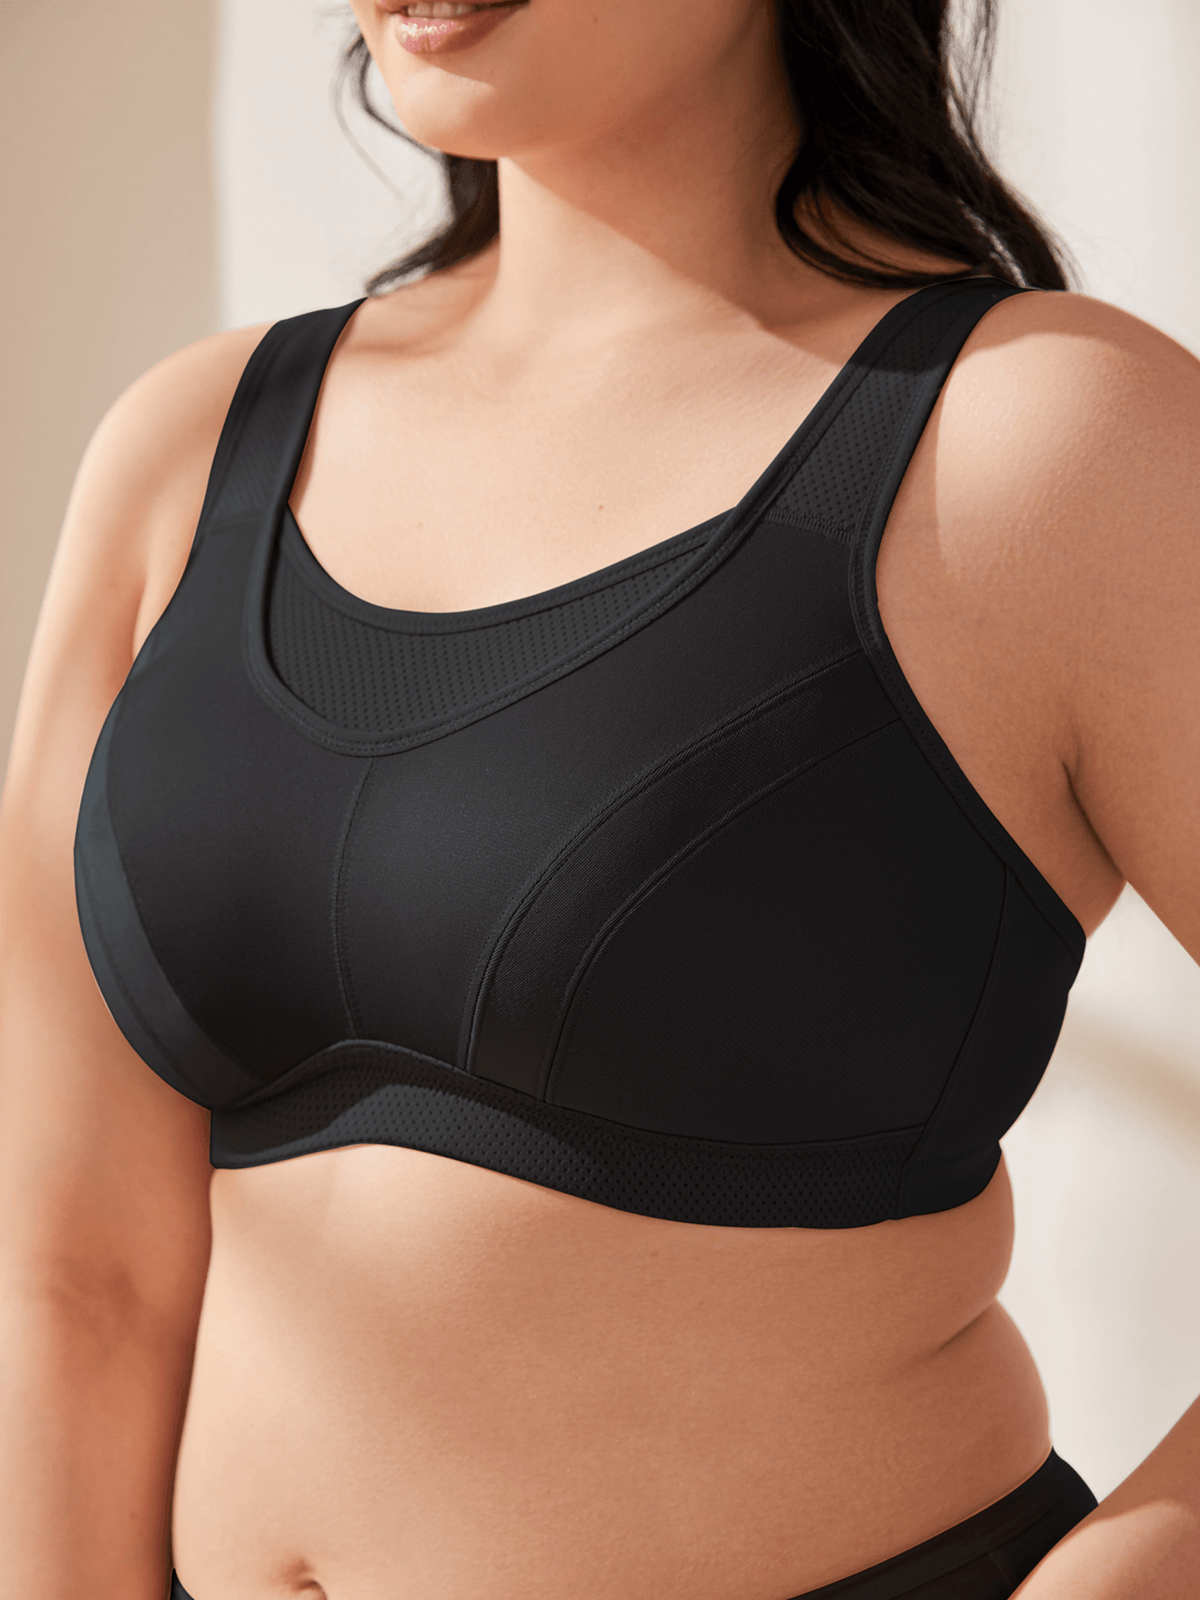 Dqueduo Wirefree Bras for Women ,Plus Size Adjustable Shoulder Straps Lace  Bra Wirefreee Extra-Elastic Bra Active Yoga Sports Bras 42C/D-48C/D, Summer